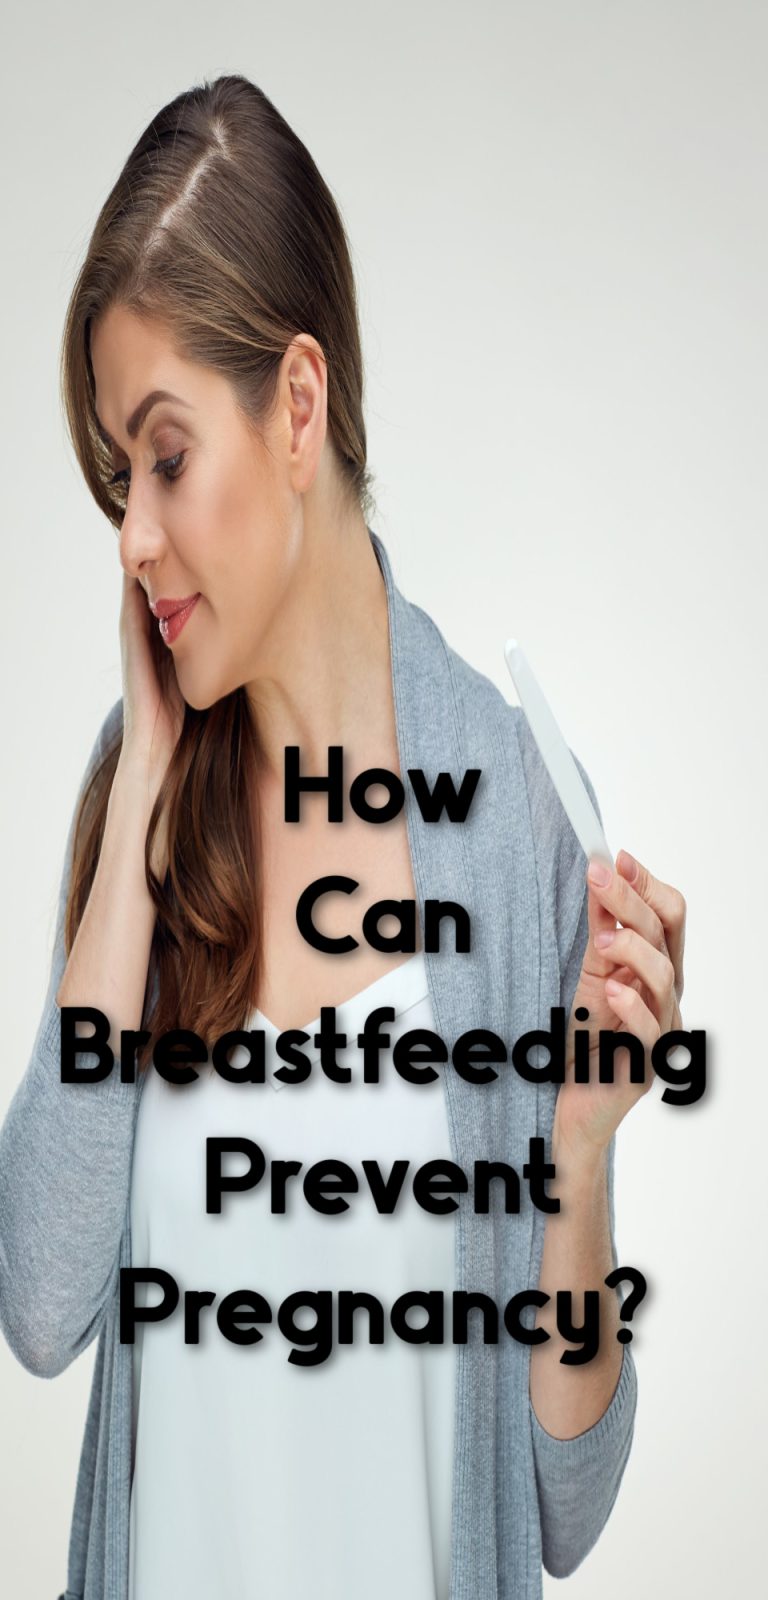 How Can Breastfeeding Prevent Pregnancy?